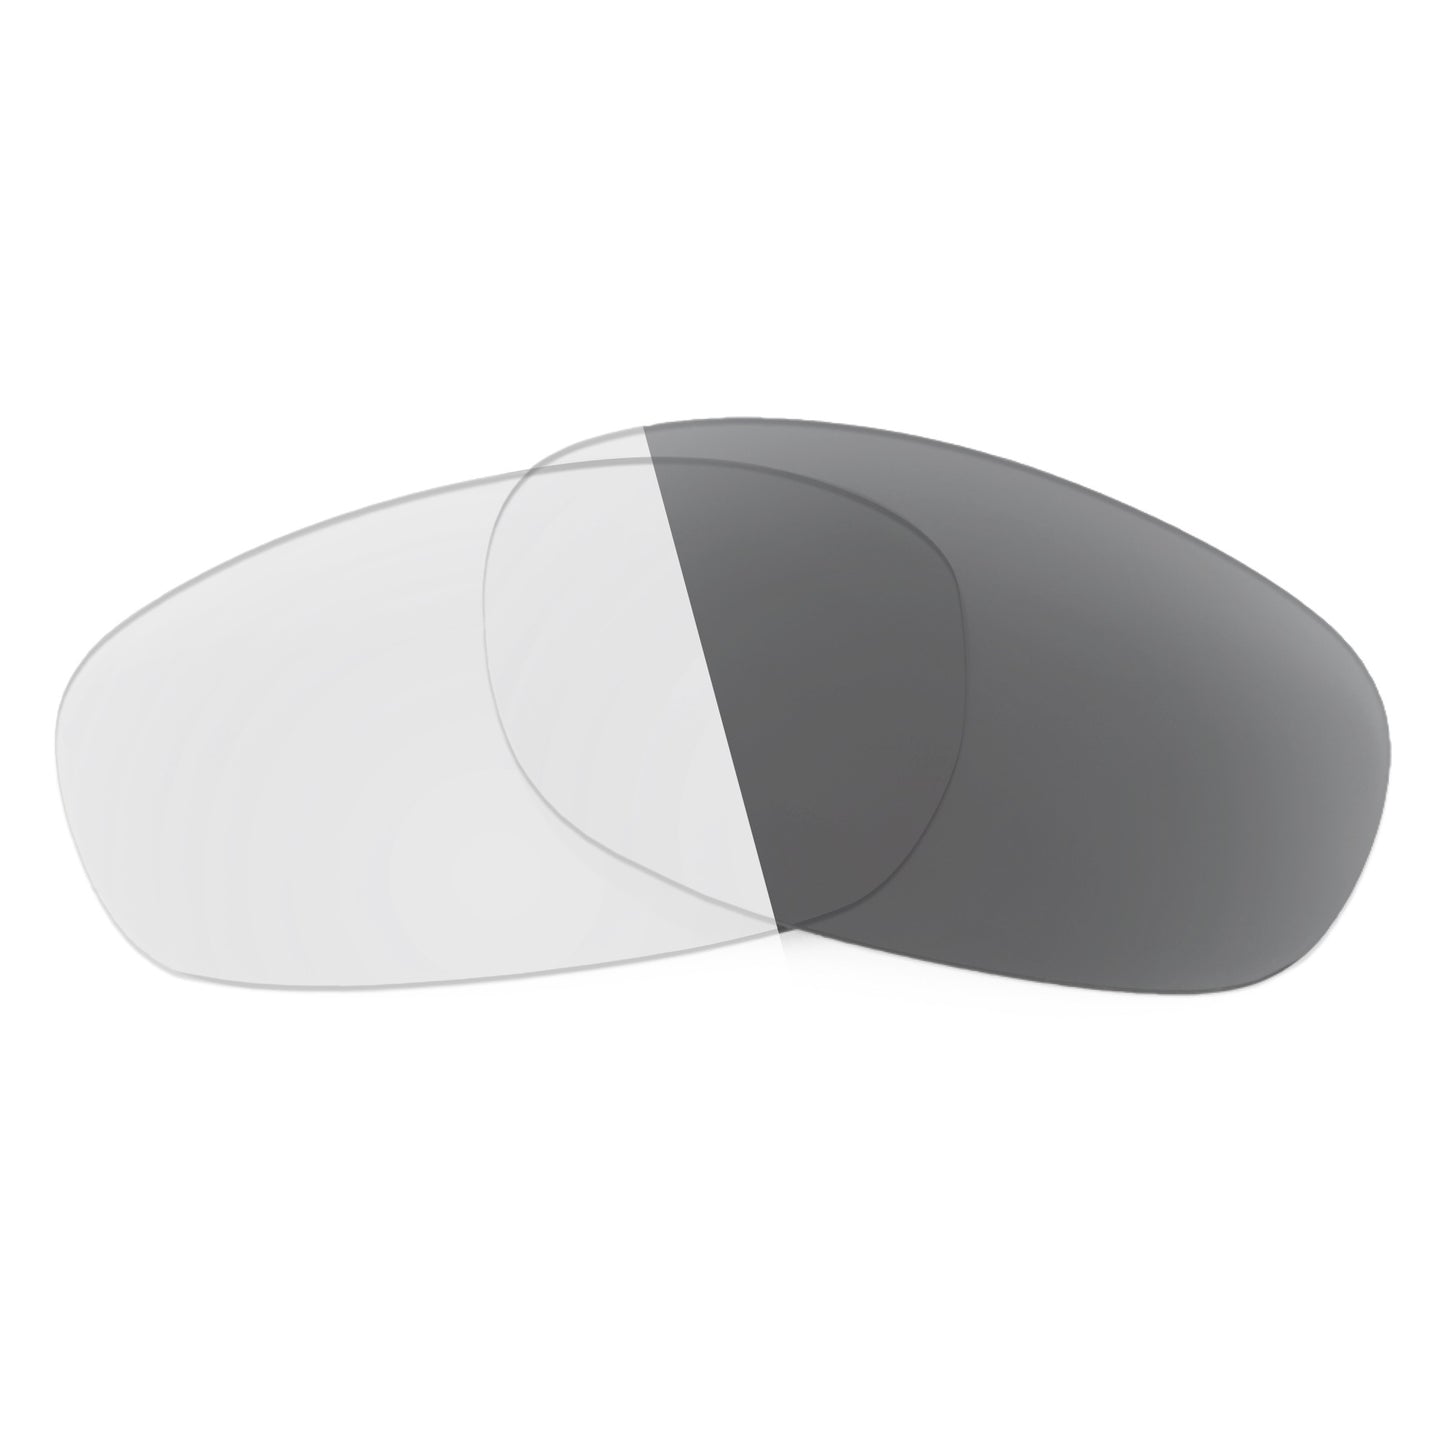 Revant replacement lenses for Ray-Ban Sidestreet RB2128 50mm Non-Polarized Adapt Gray Photochromic